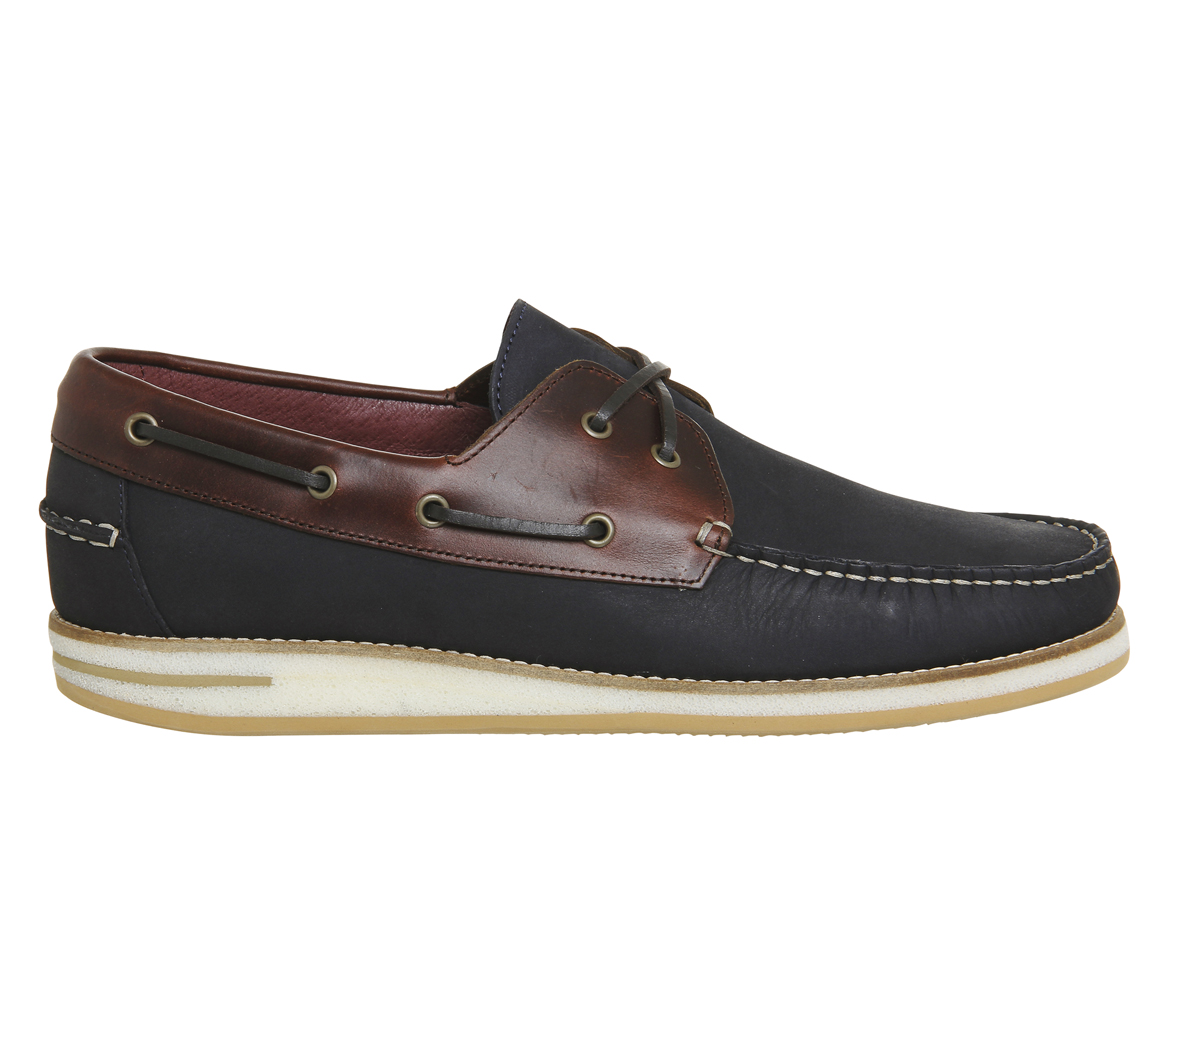 Poste Duoro Boat Shoes Navy Nubuck Tan Leather - Men's Casual Shoes